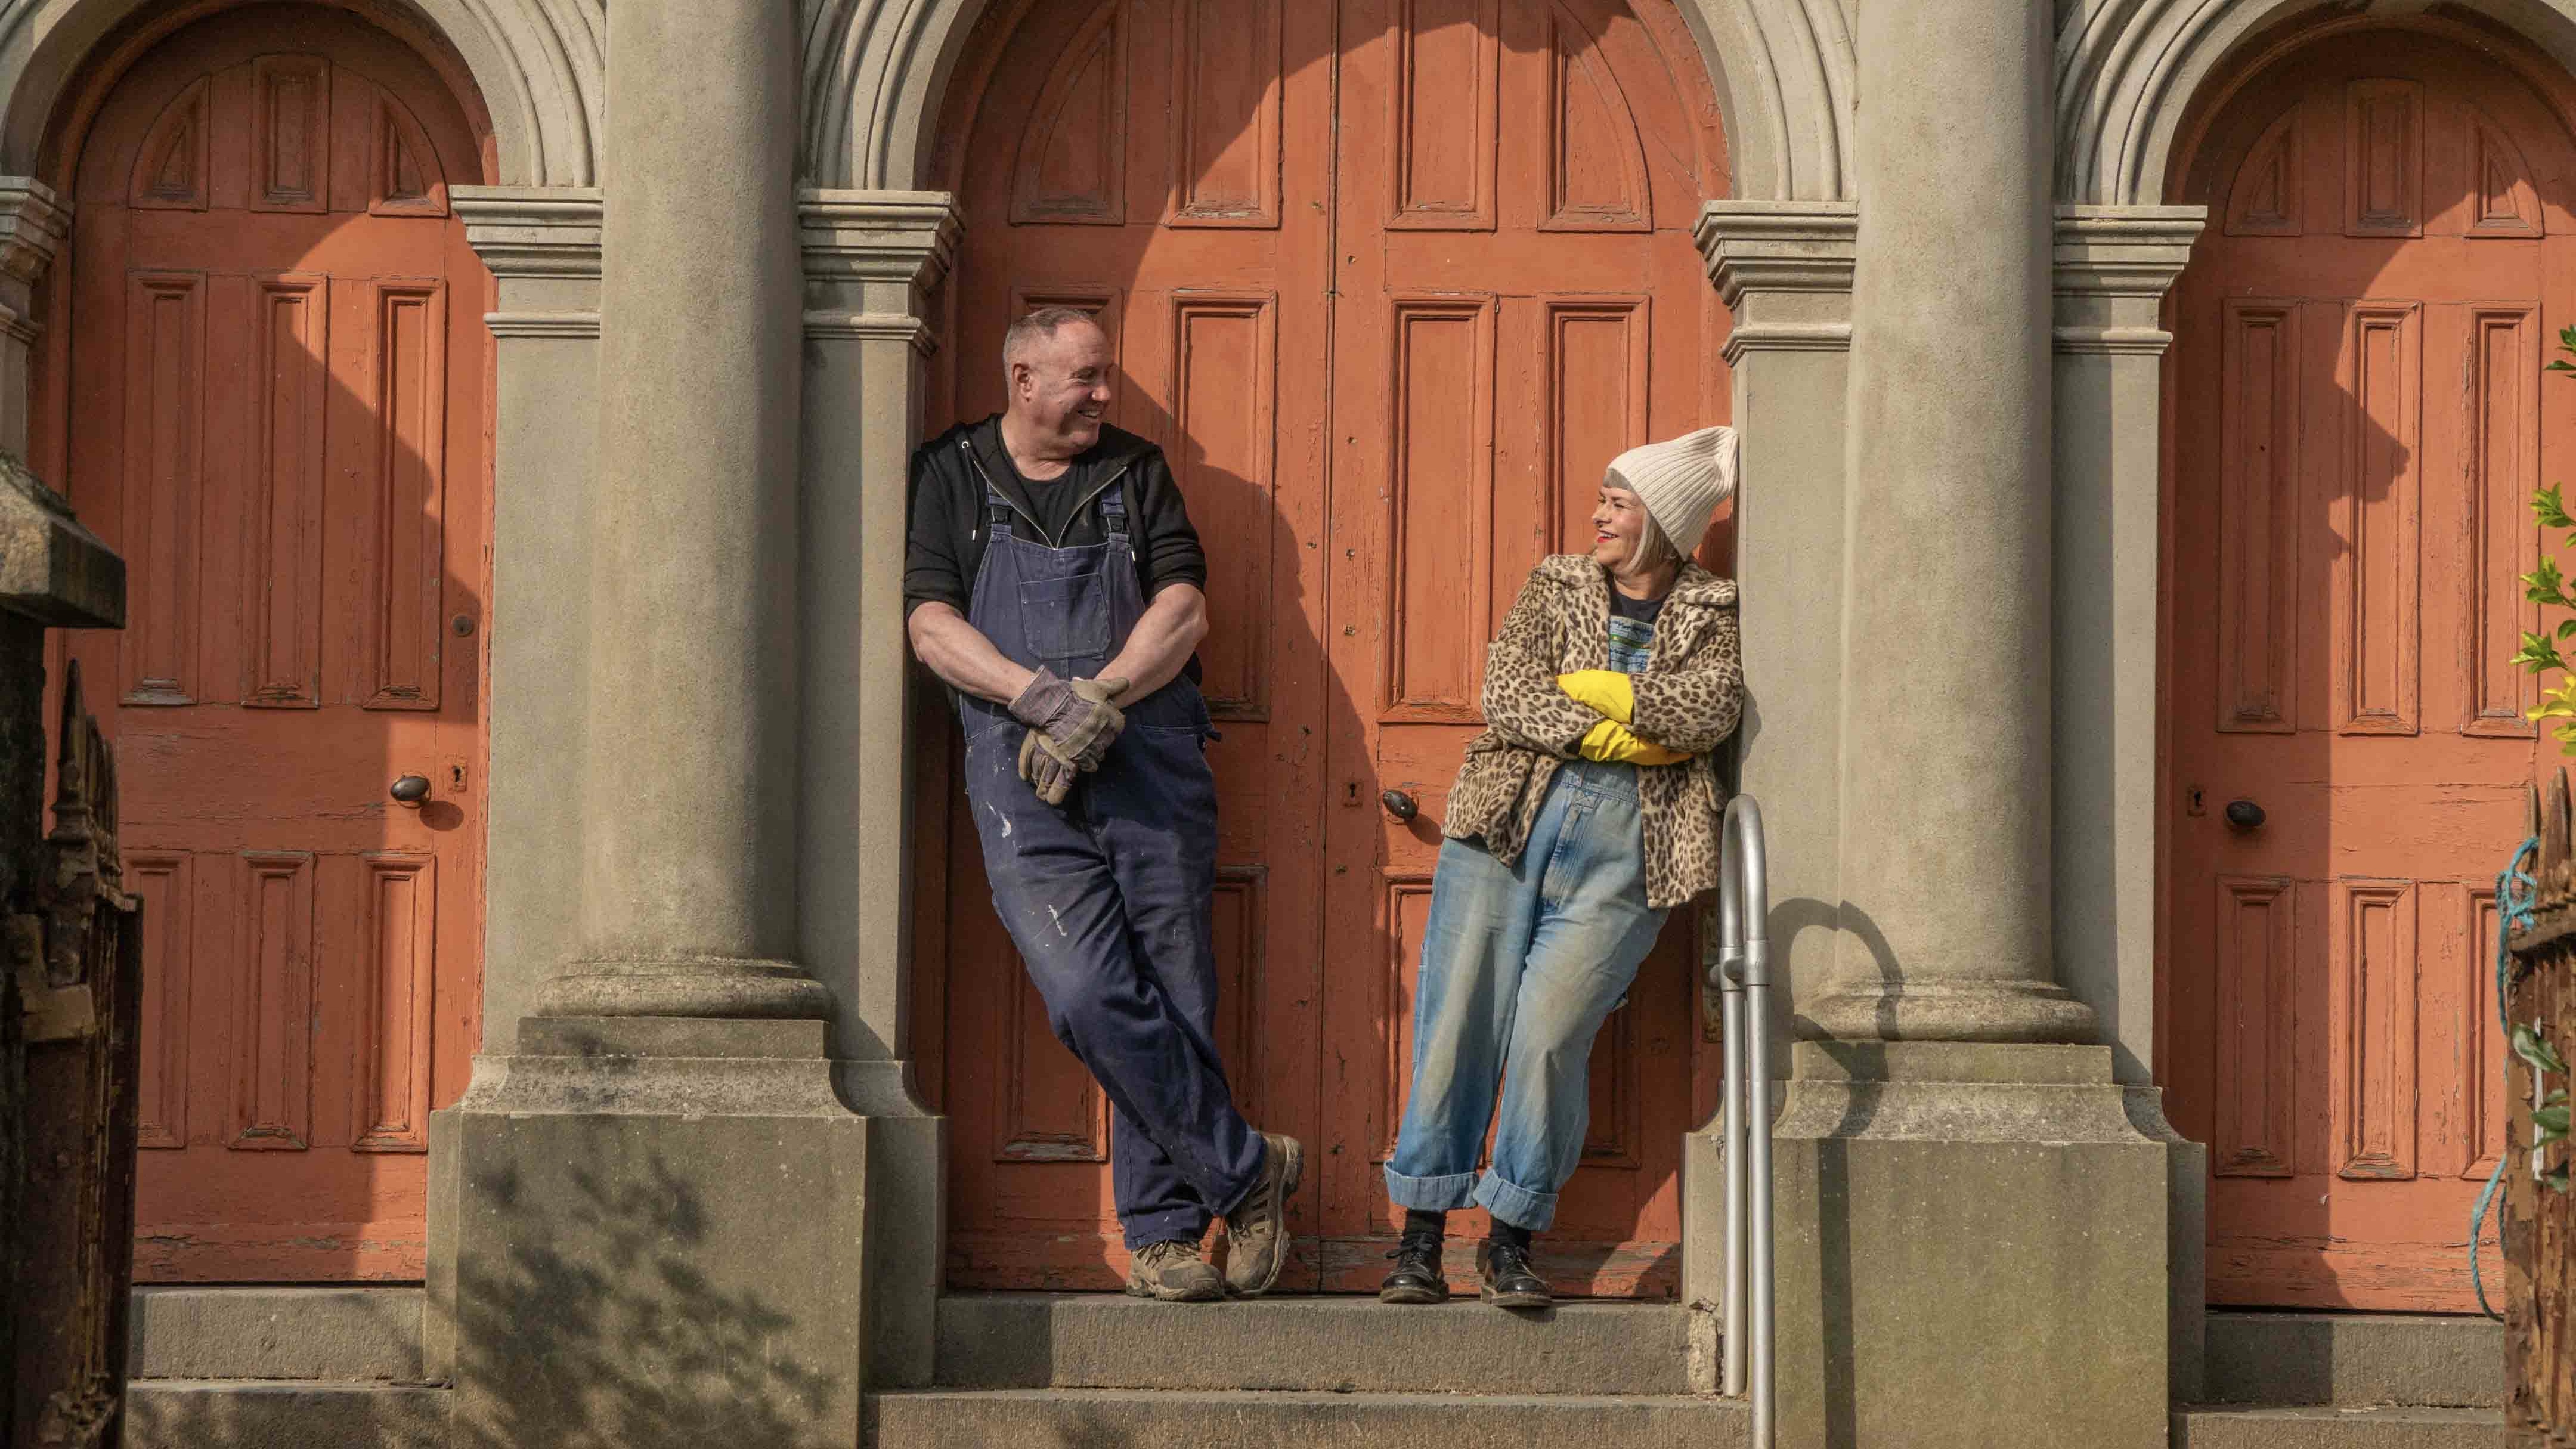 Keith Brymer Jones and Marj Hogarth in overalls stand in the doorway of their chapel in Our Welsh Chapel Dream